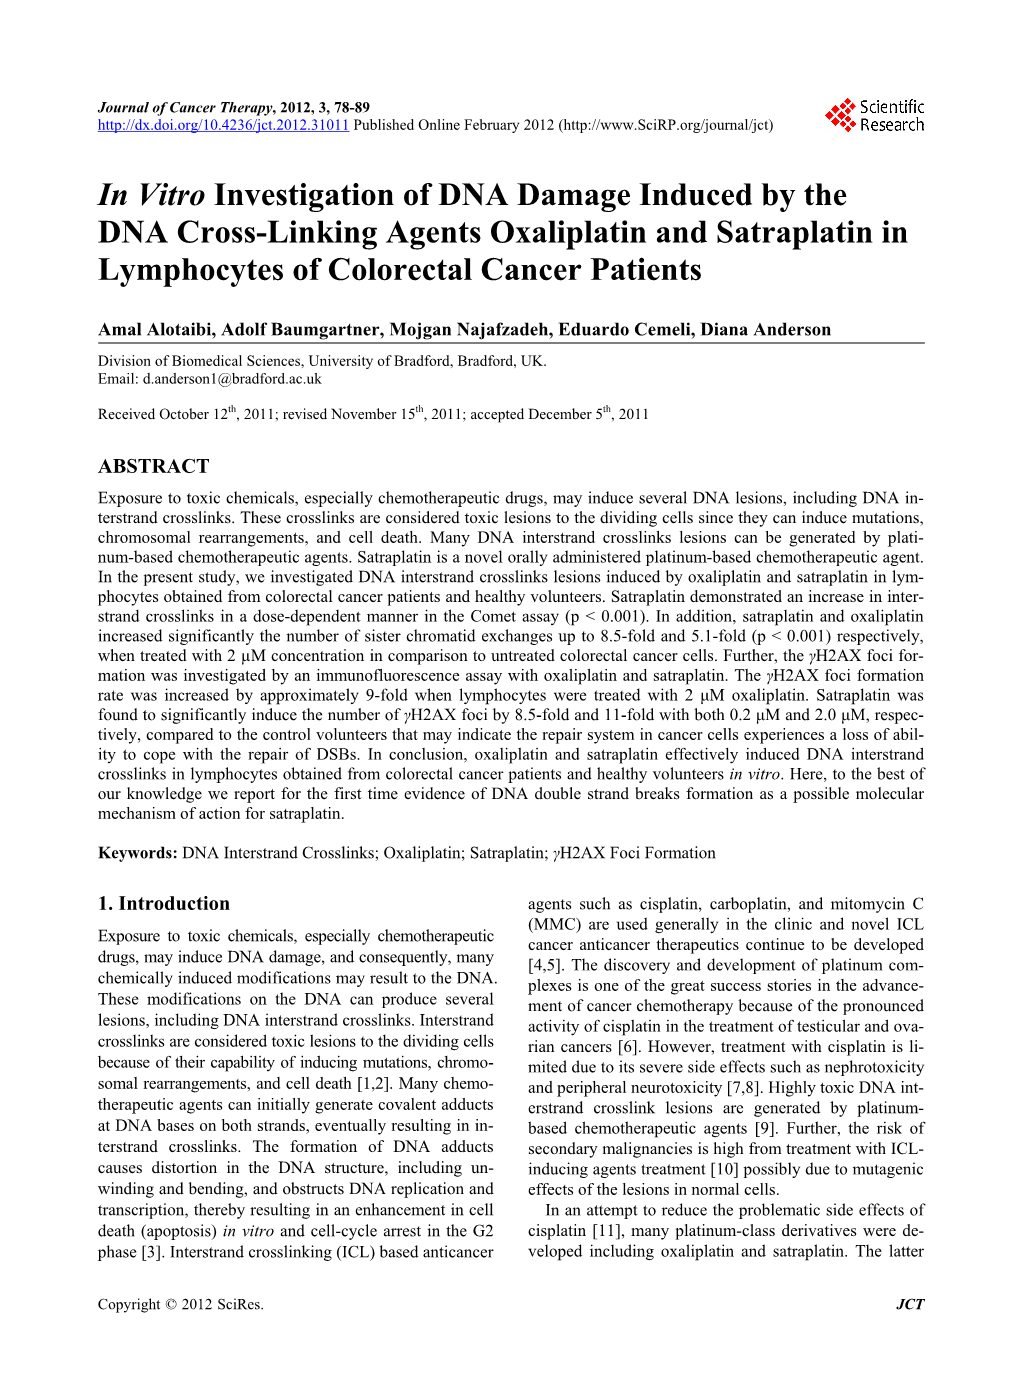 In Vitro Investigation of DNA Damage Induced by the DNA Cross-Linking Agents Oxaliplatin and Satraplatin in Lymphocytes of Colorectal Cancer Patients